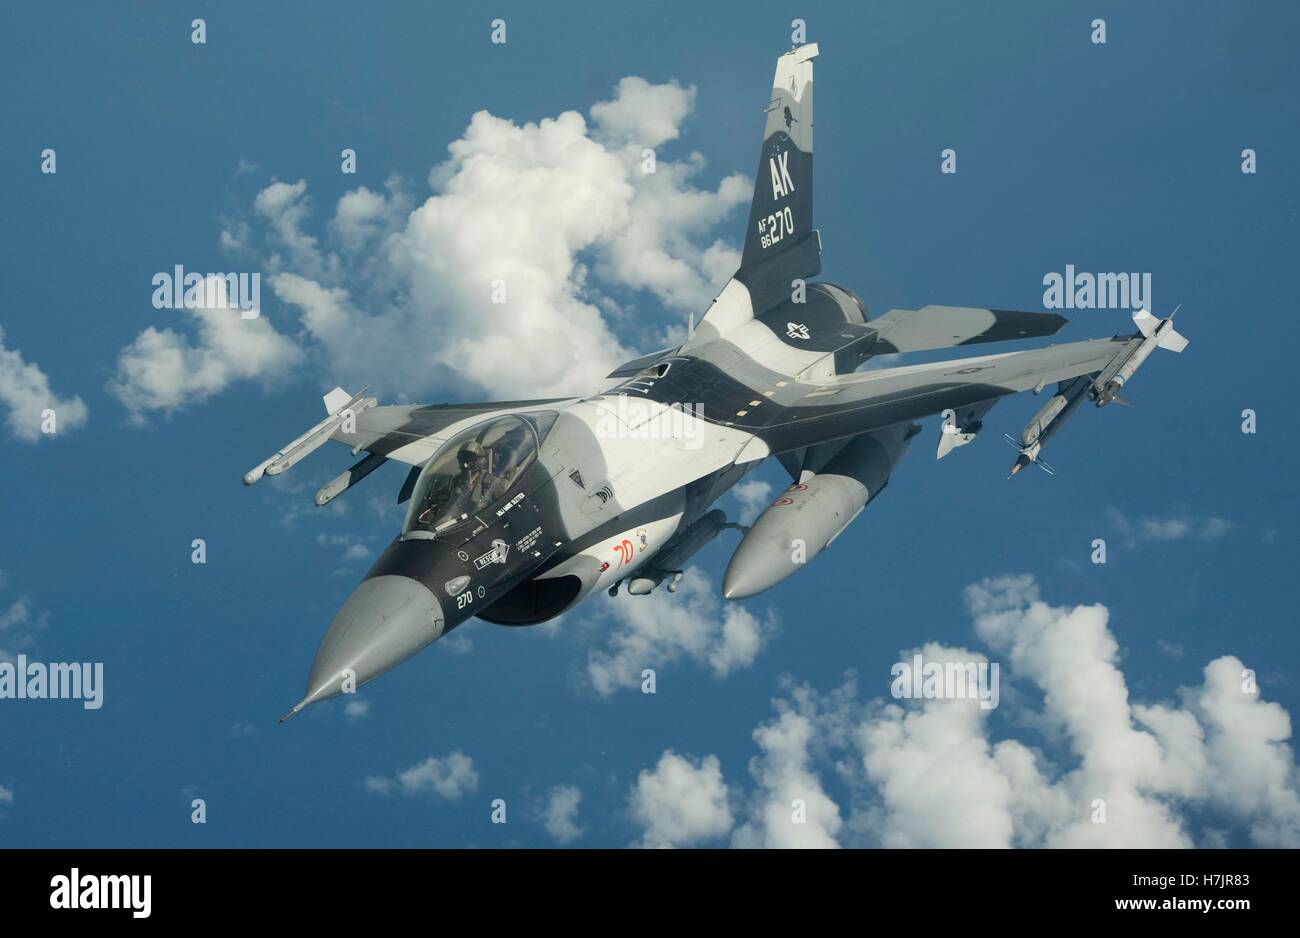 An F-16C Fighting Falcon fighter aircraft in flight during exercise Valiant Shield September 20, 2014 over Guam. Stock Photo